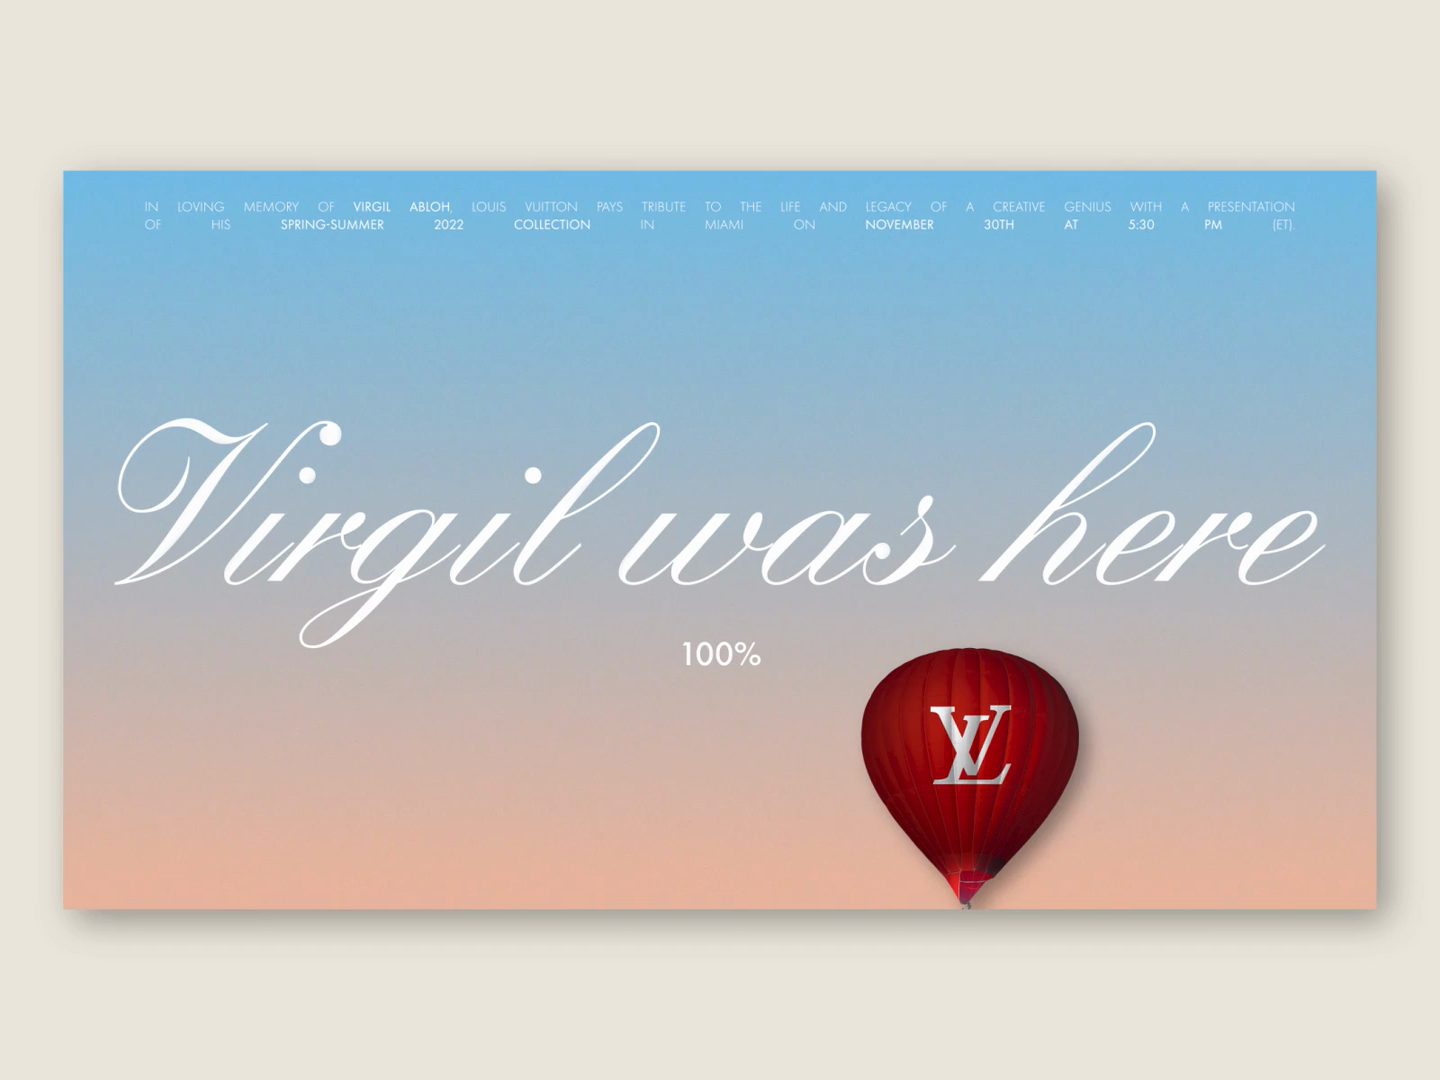 virgil was here text